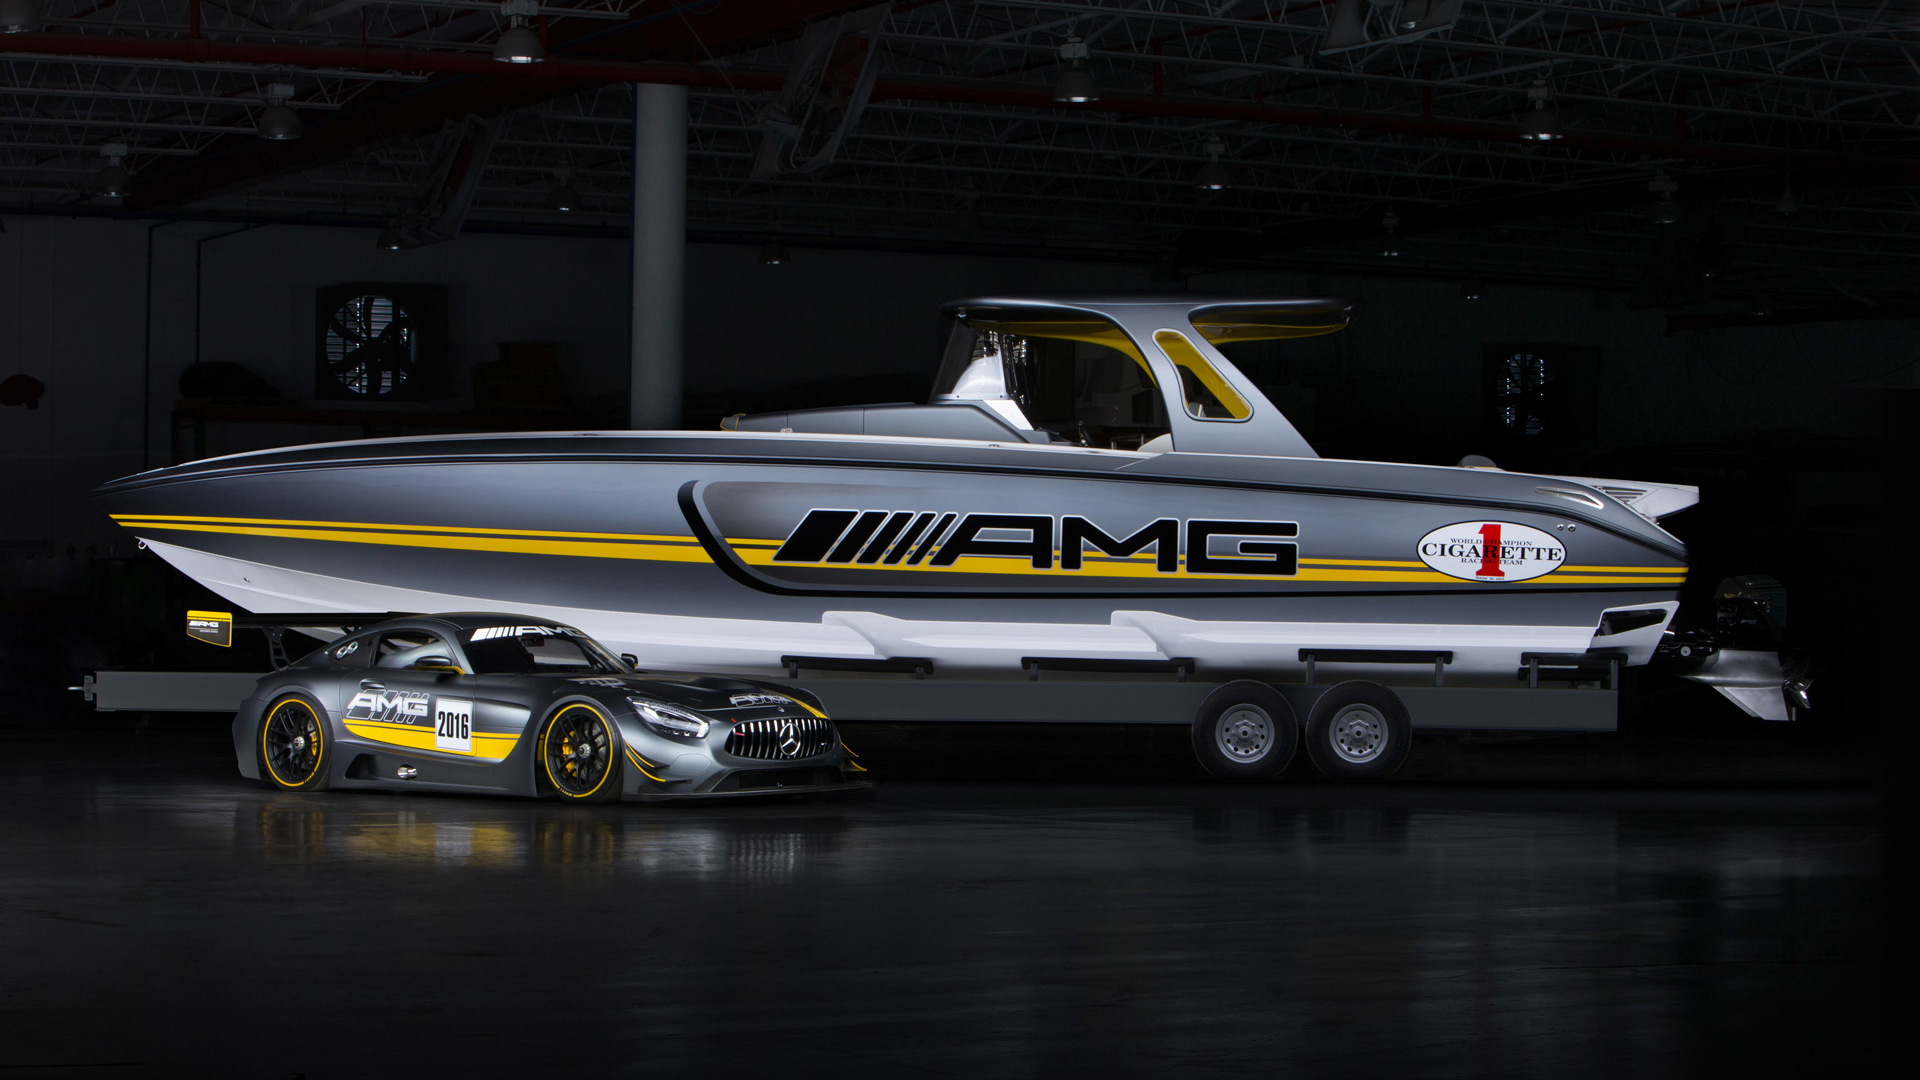 Cigarette Racing 41’ SD GT3 boat and 2016 Mercedes-AMG GT3 race car